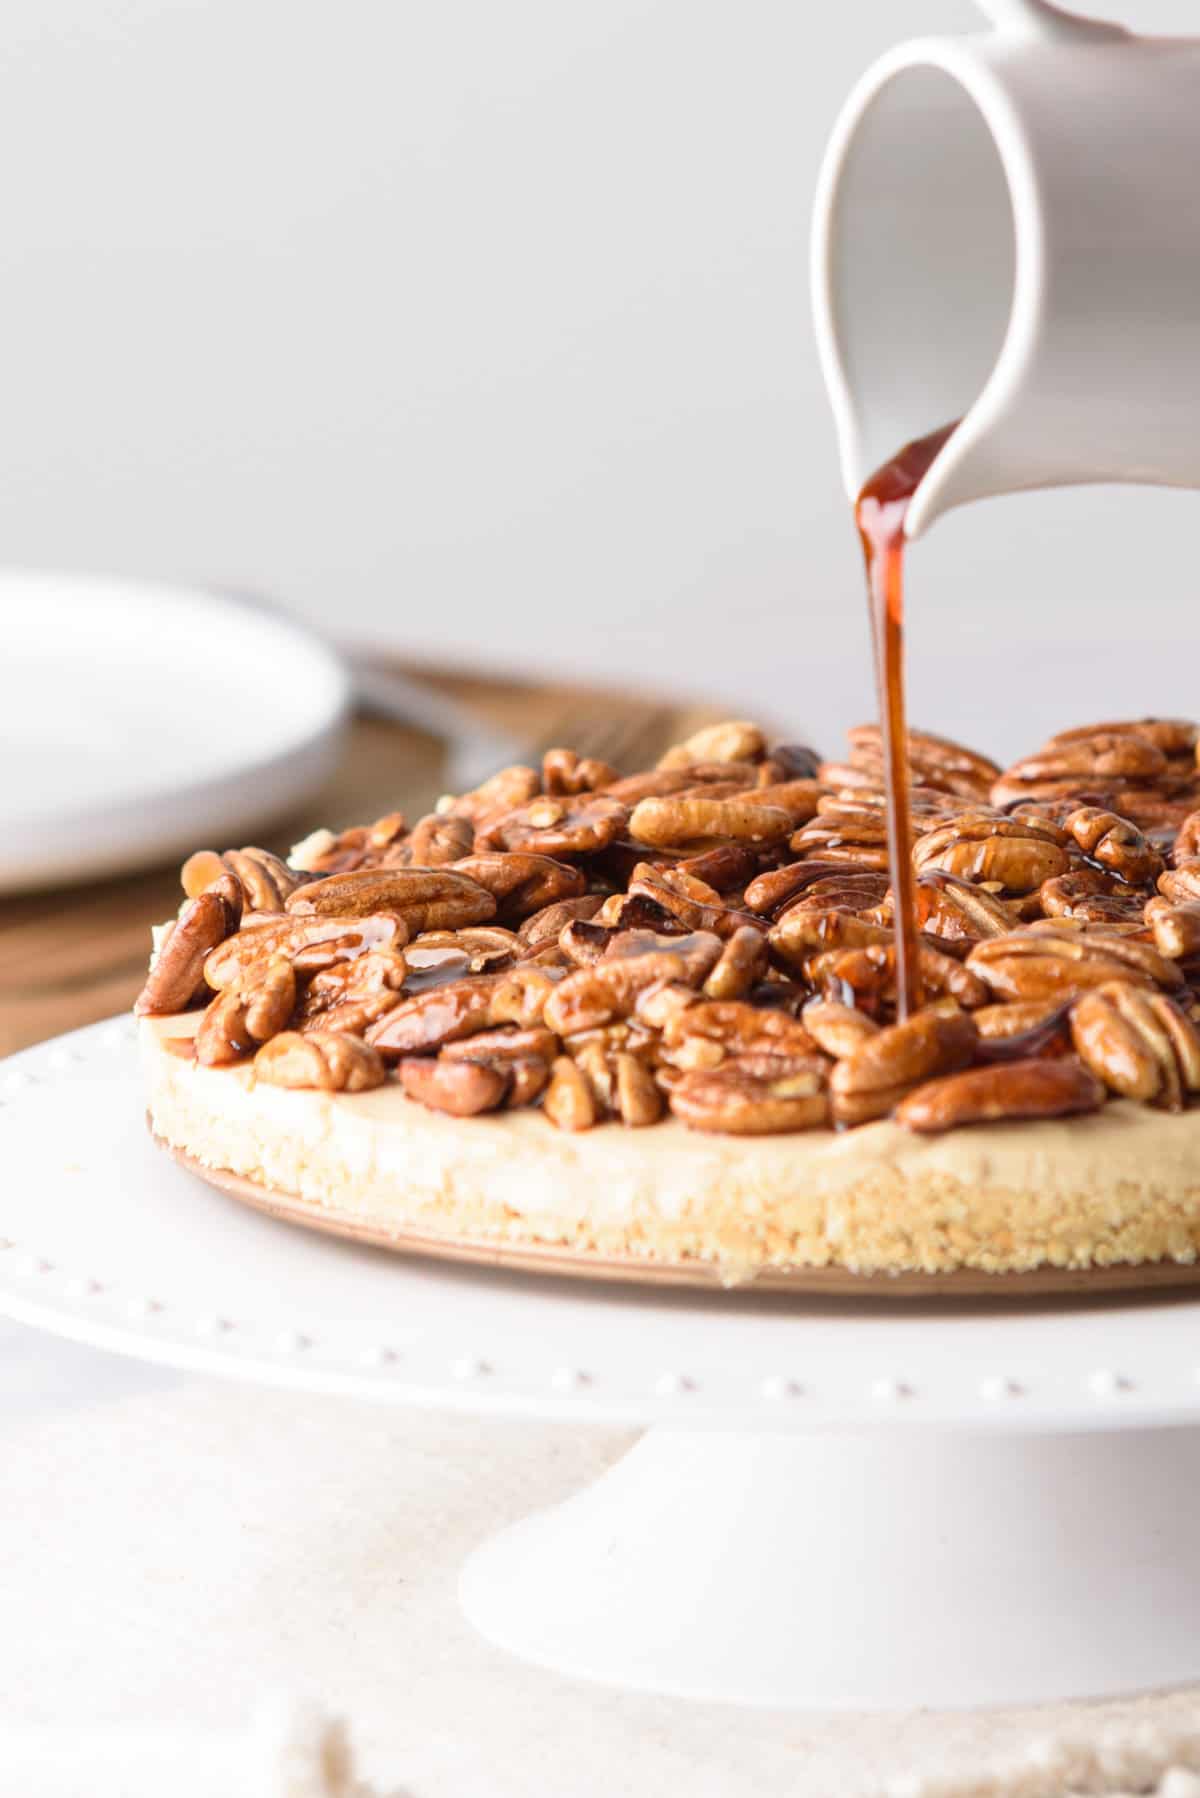 Caramel being poured over the full pecan pie cheesecake.